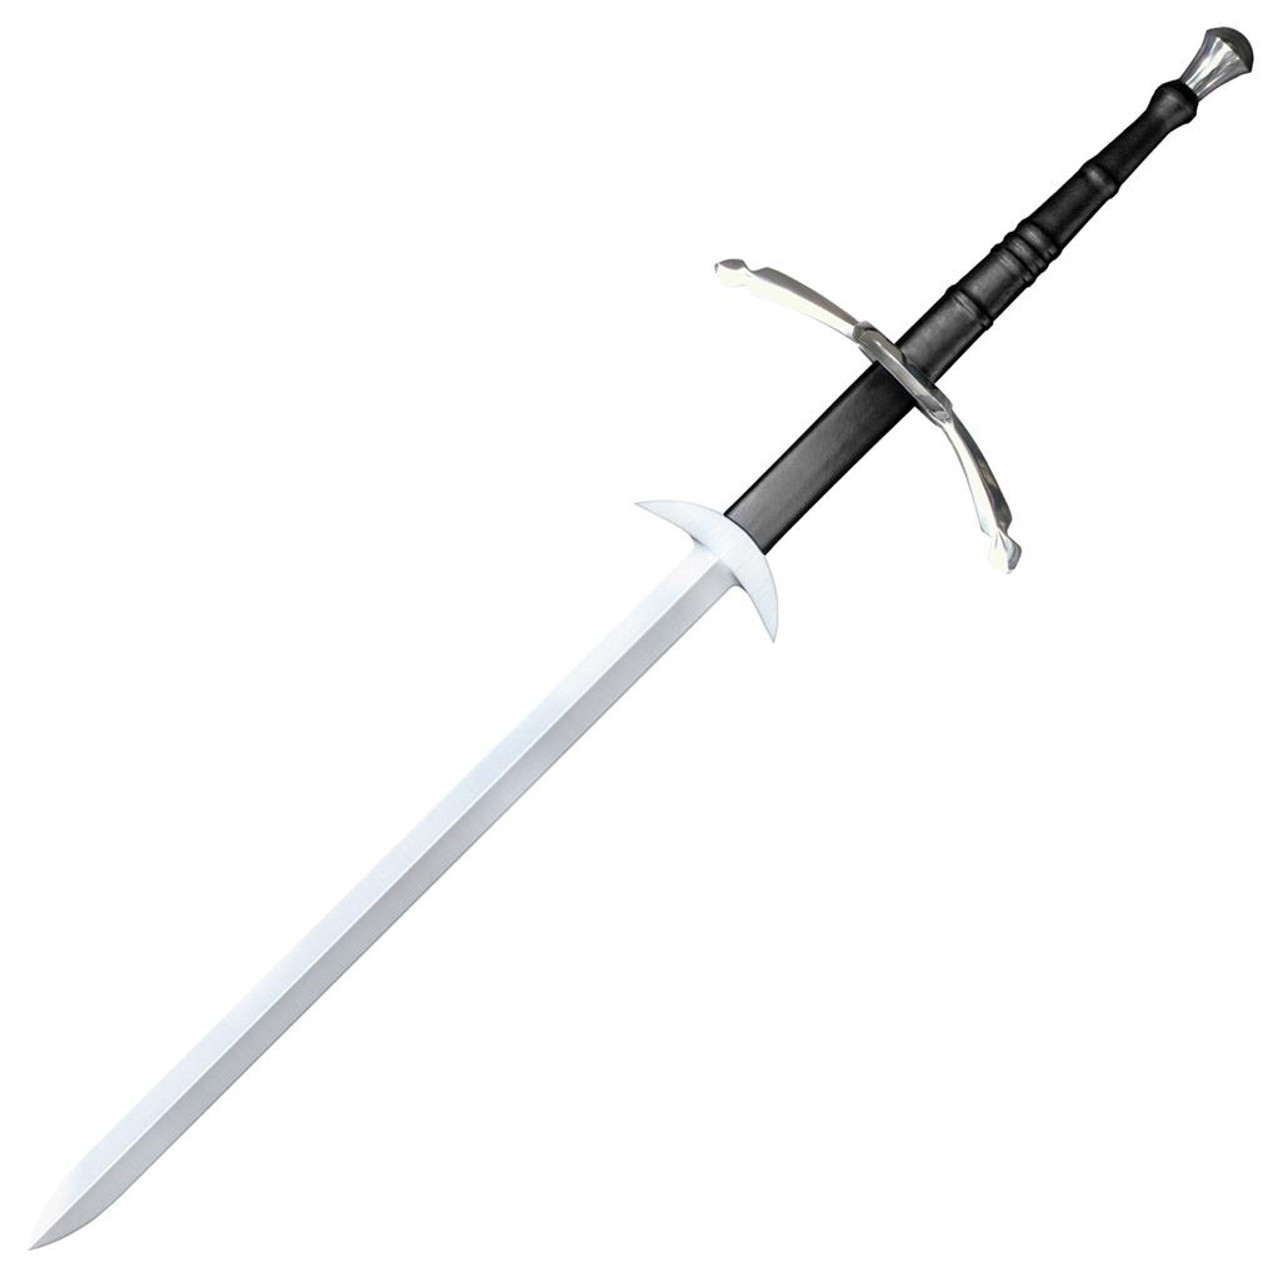 Medieval Two Handed Sword